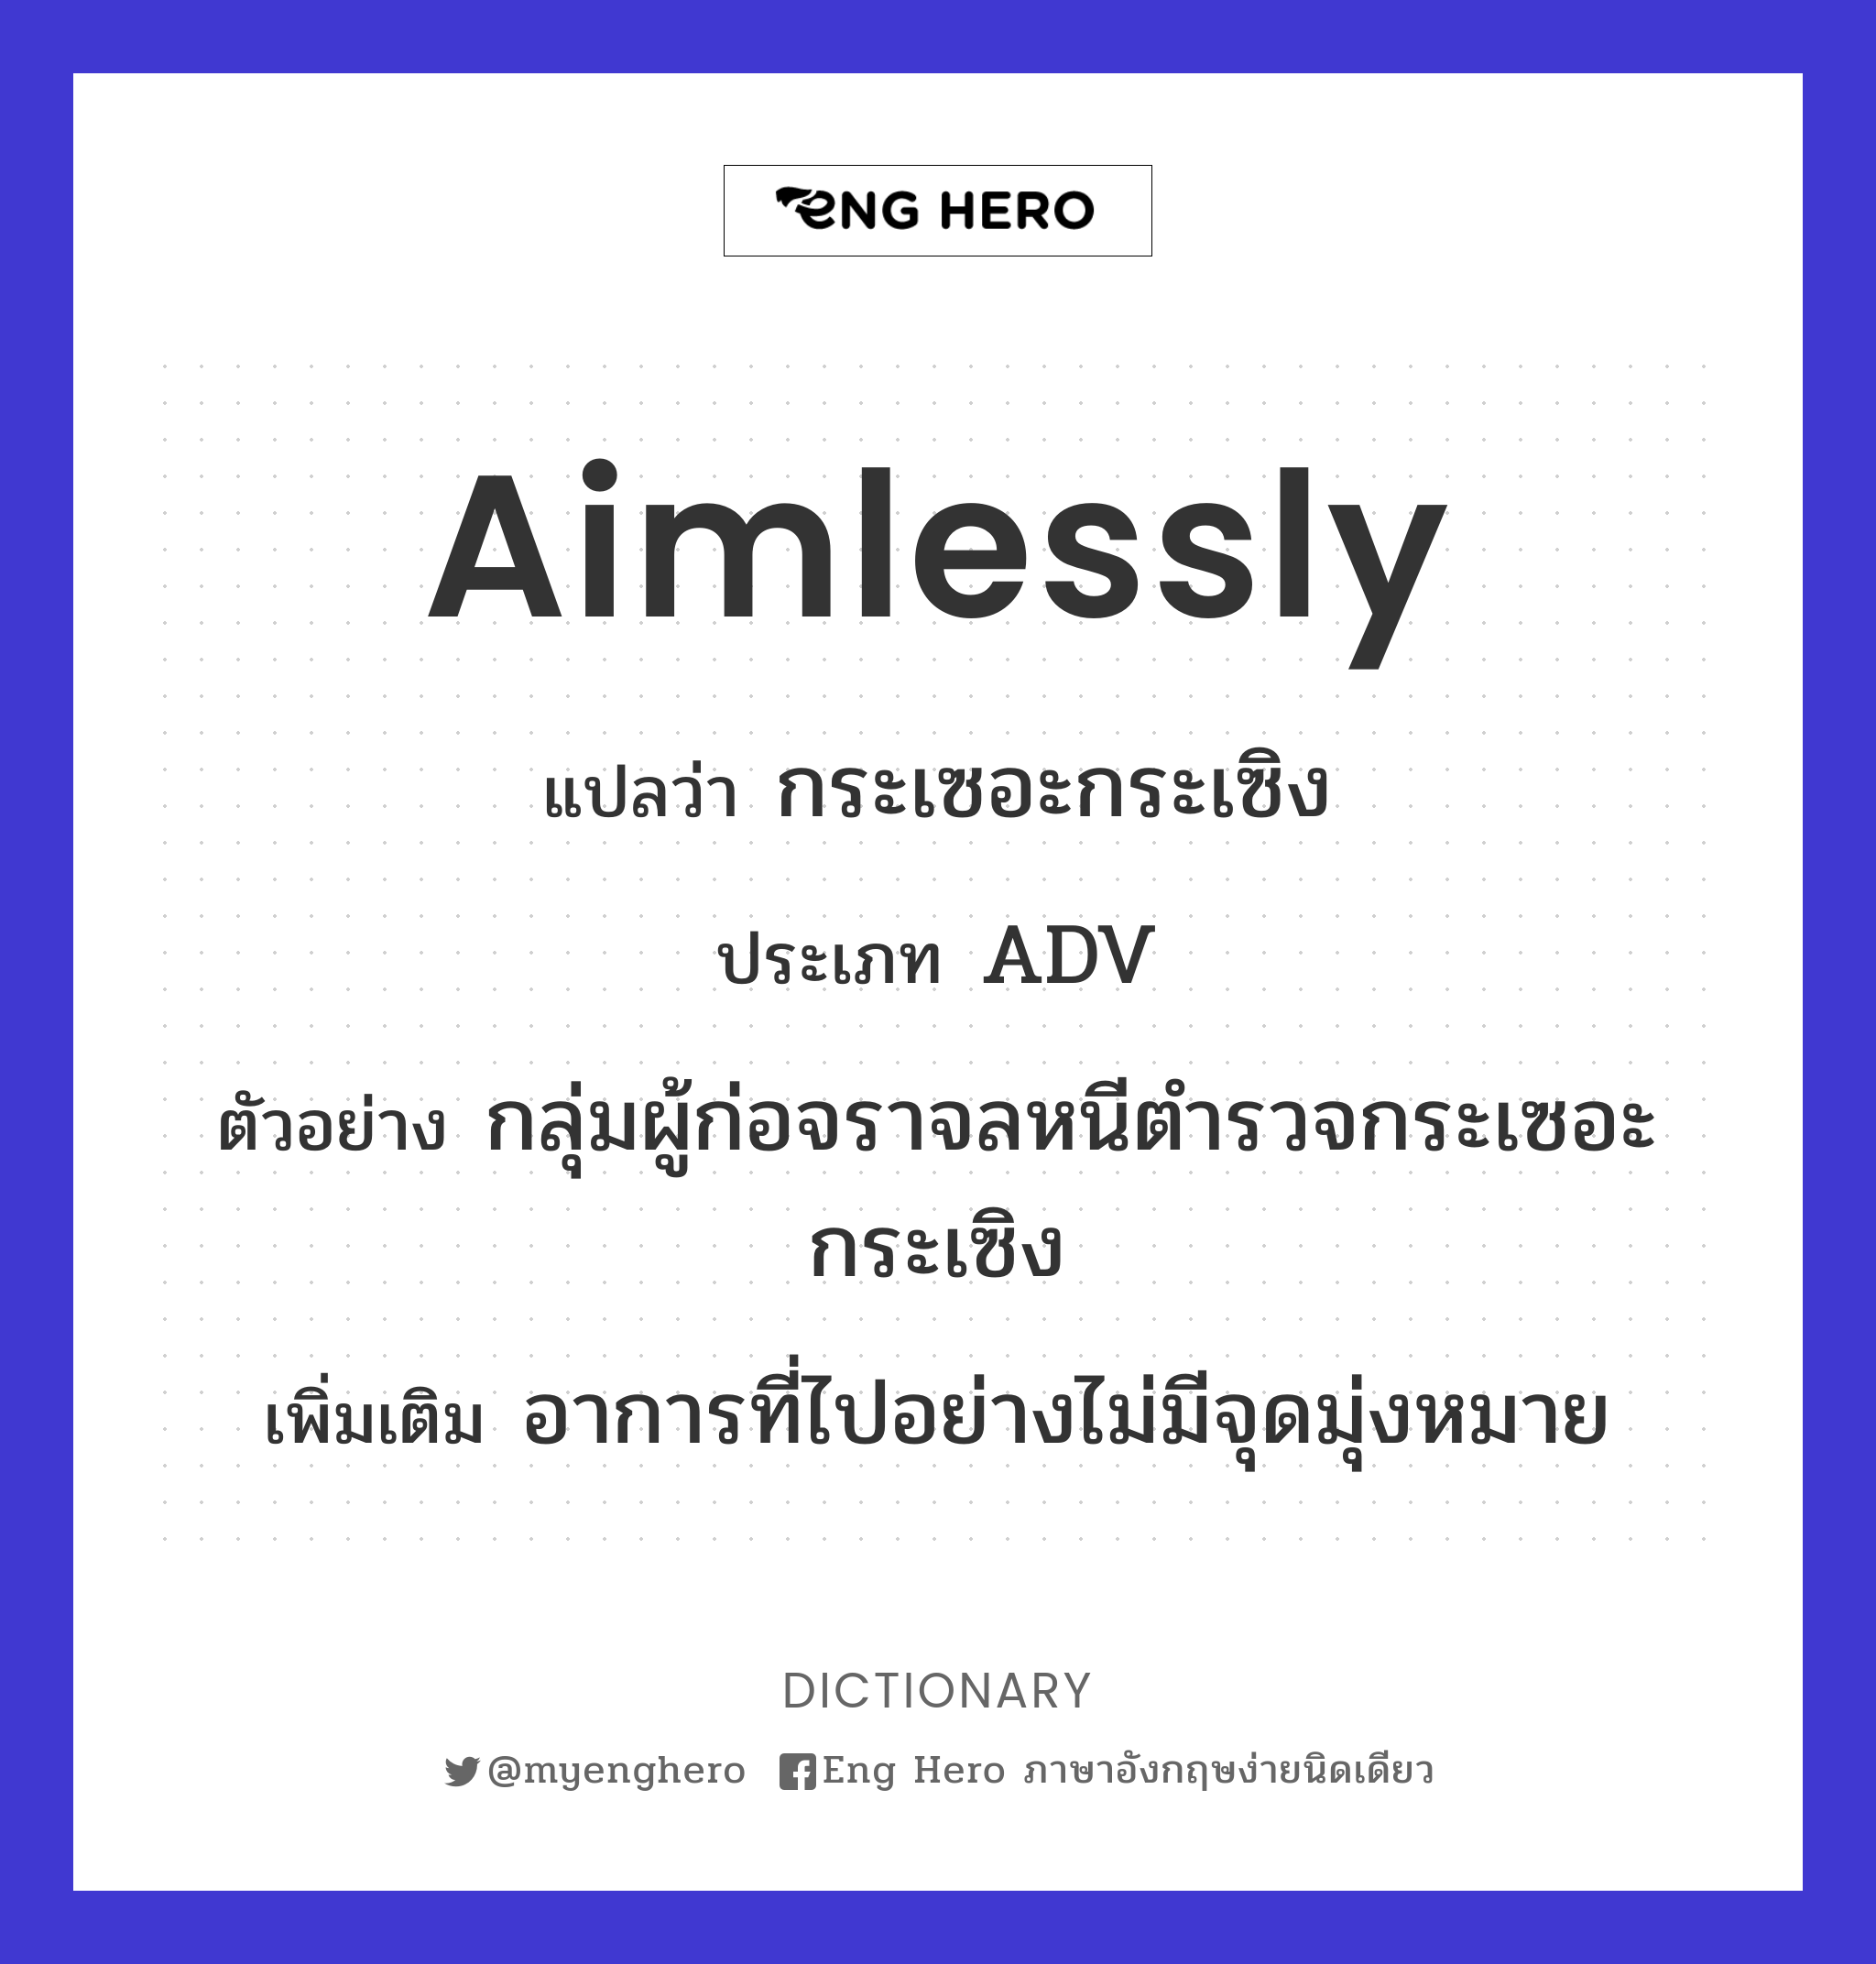 aimlessly